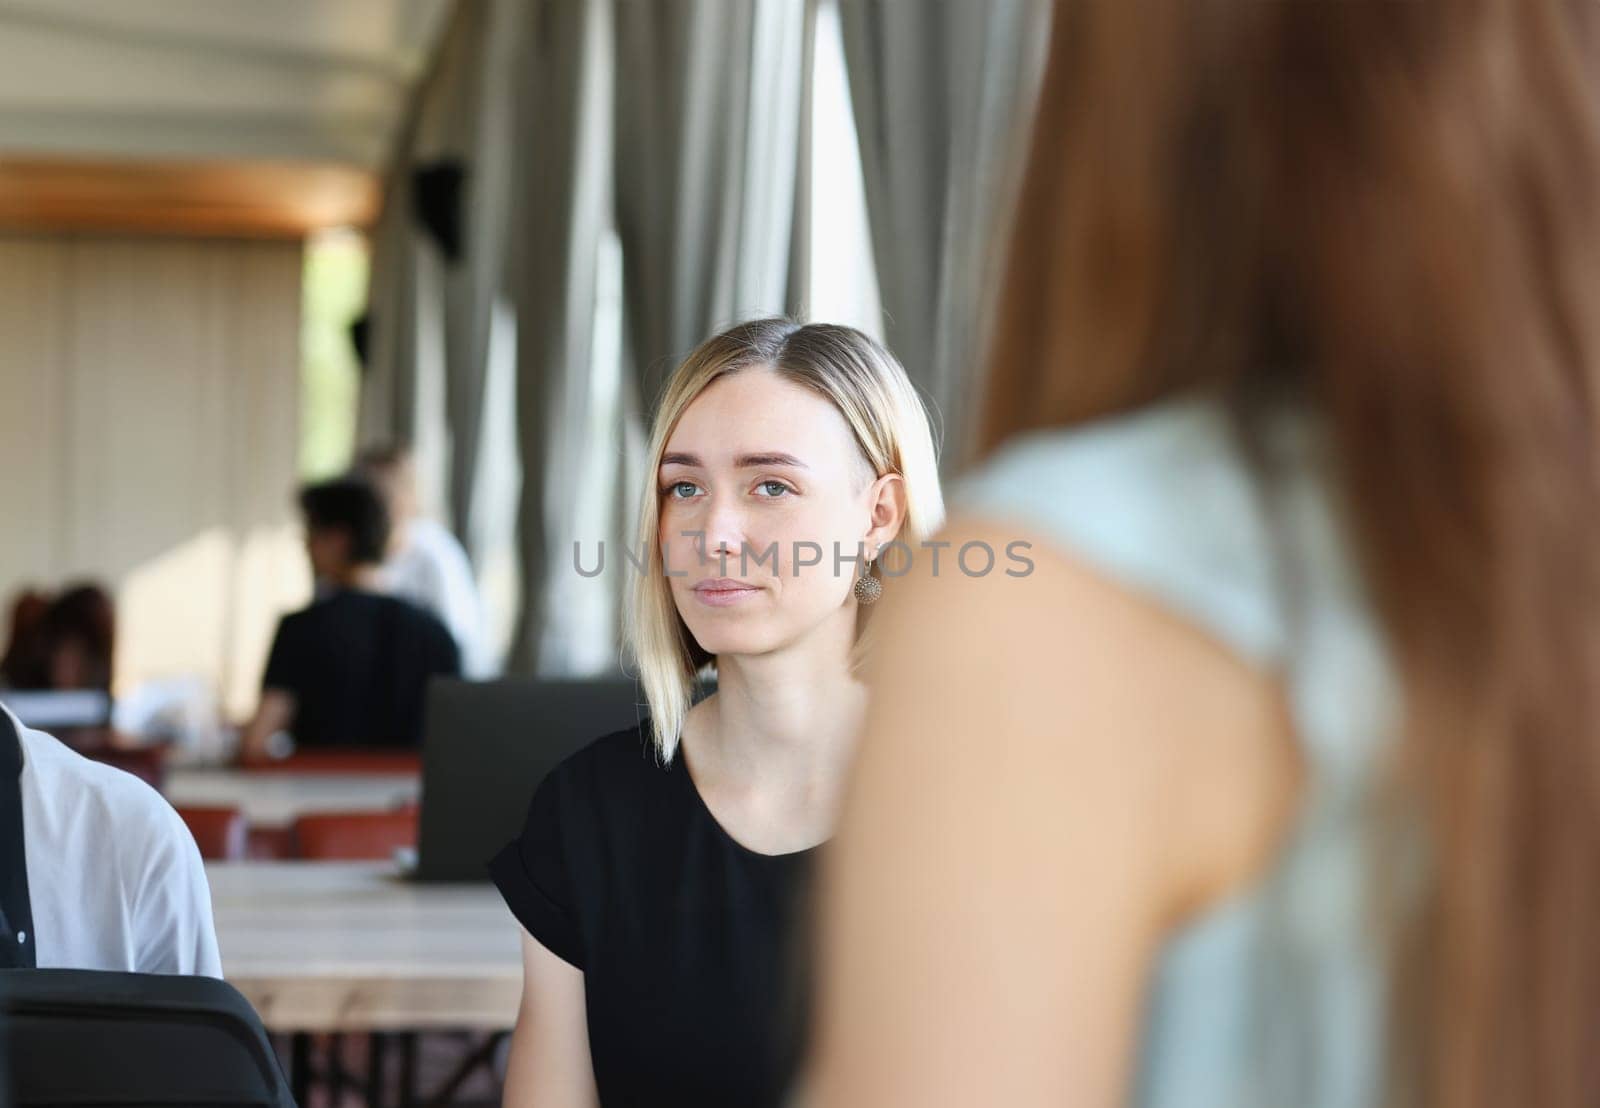 Beautiful smiling cheerful girl at workplace look at camera with colleagues group in background. White collar worker at cafe modern lifestyle client visit profession train concept